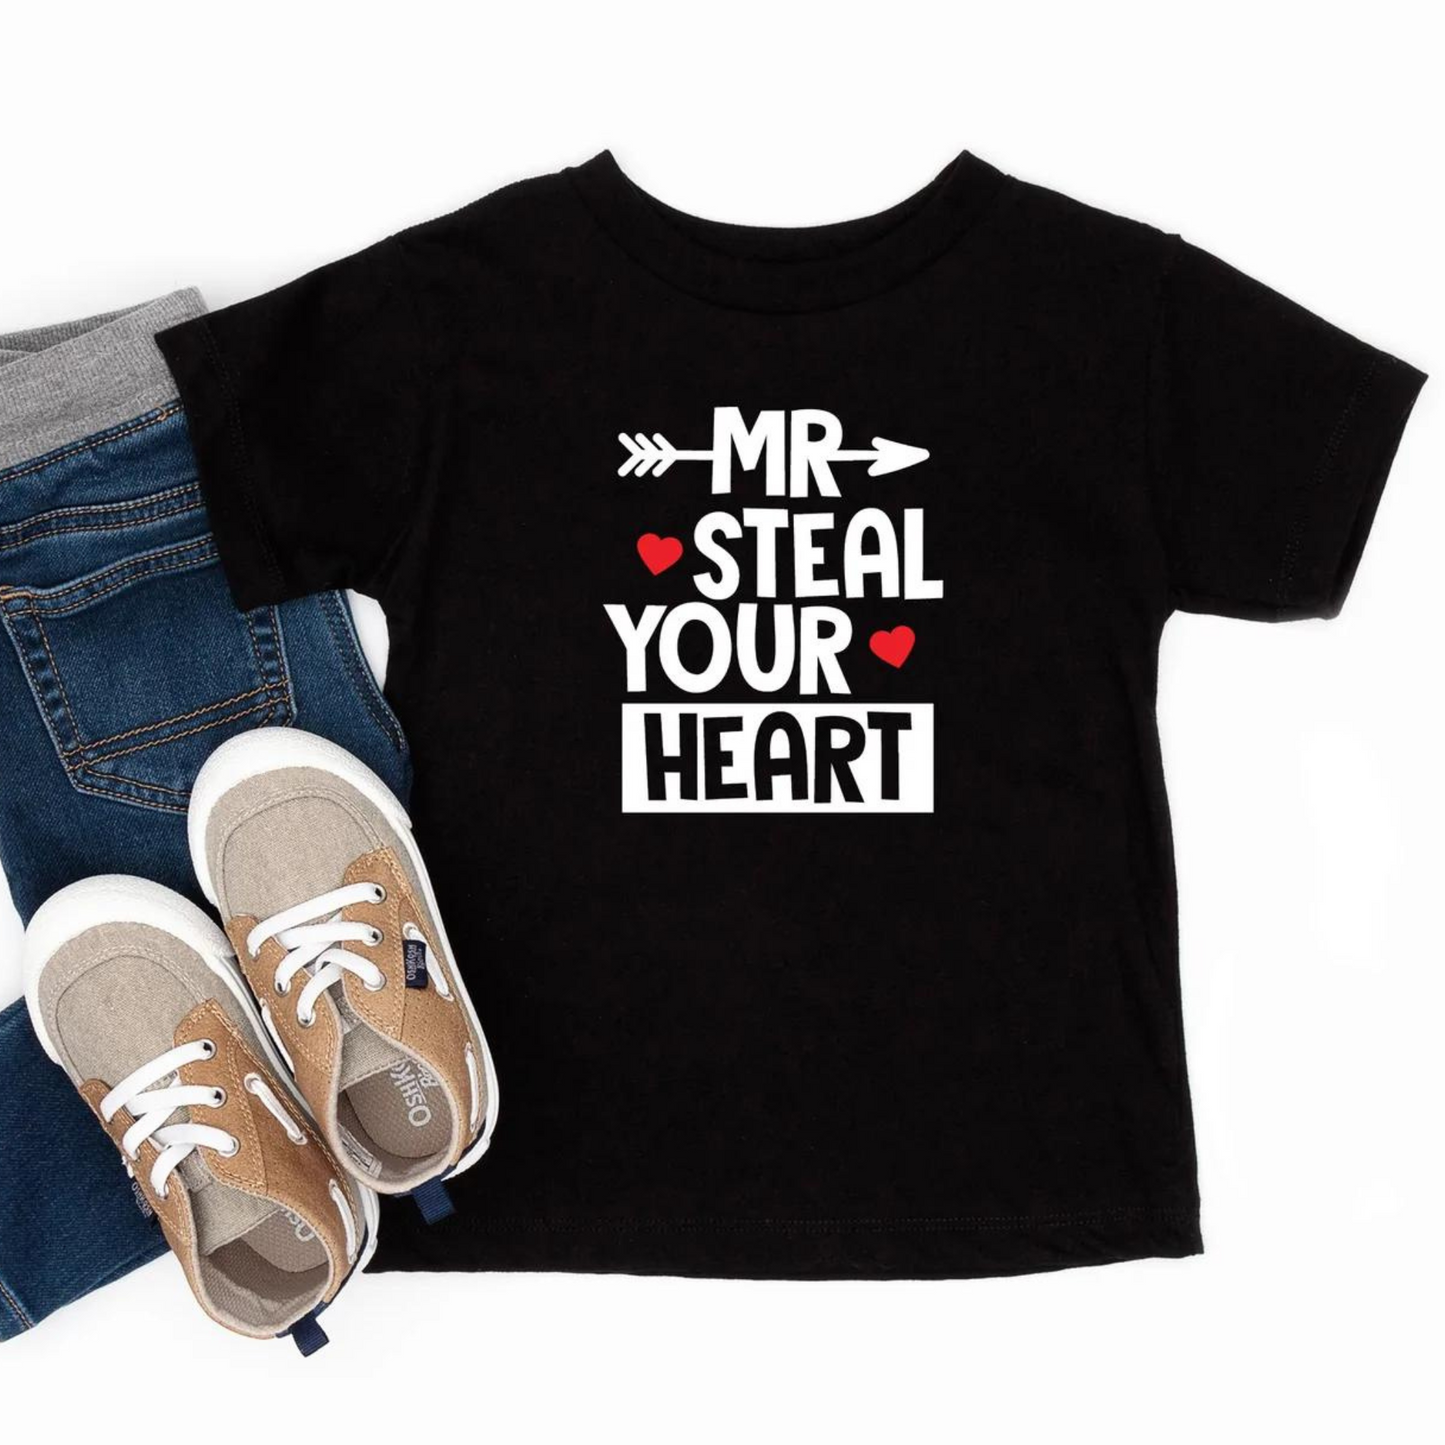 Mr. Steal Your Heart Short Sleeve Tee, Black